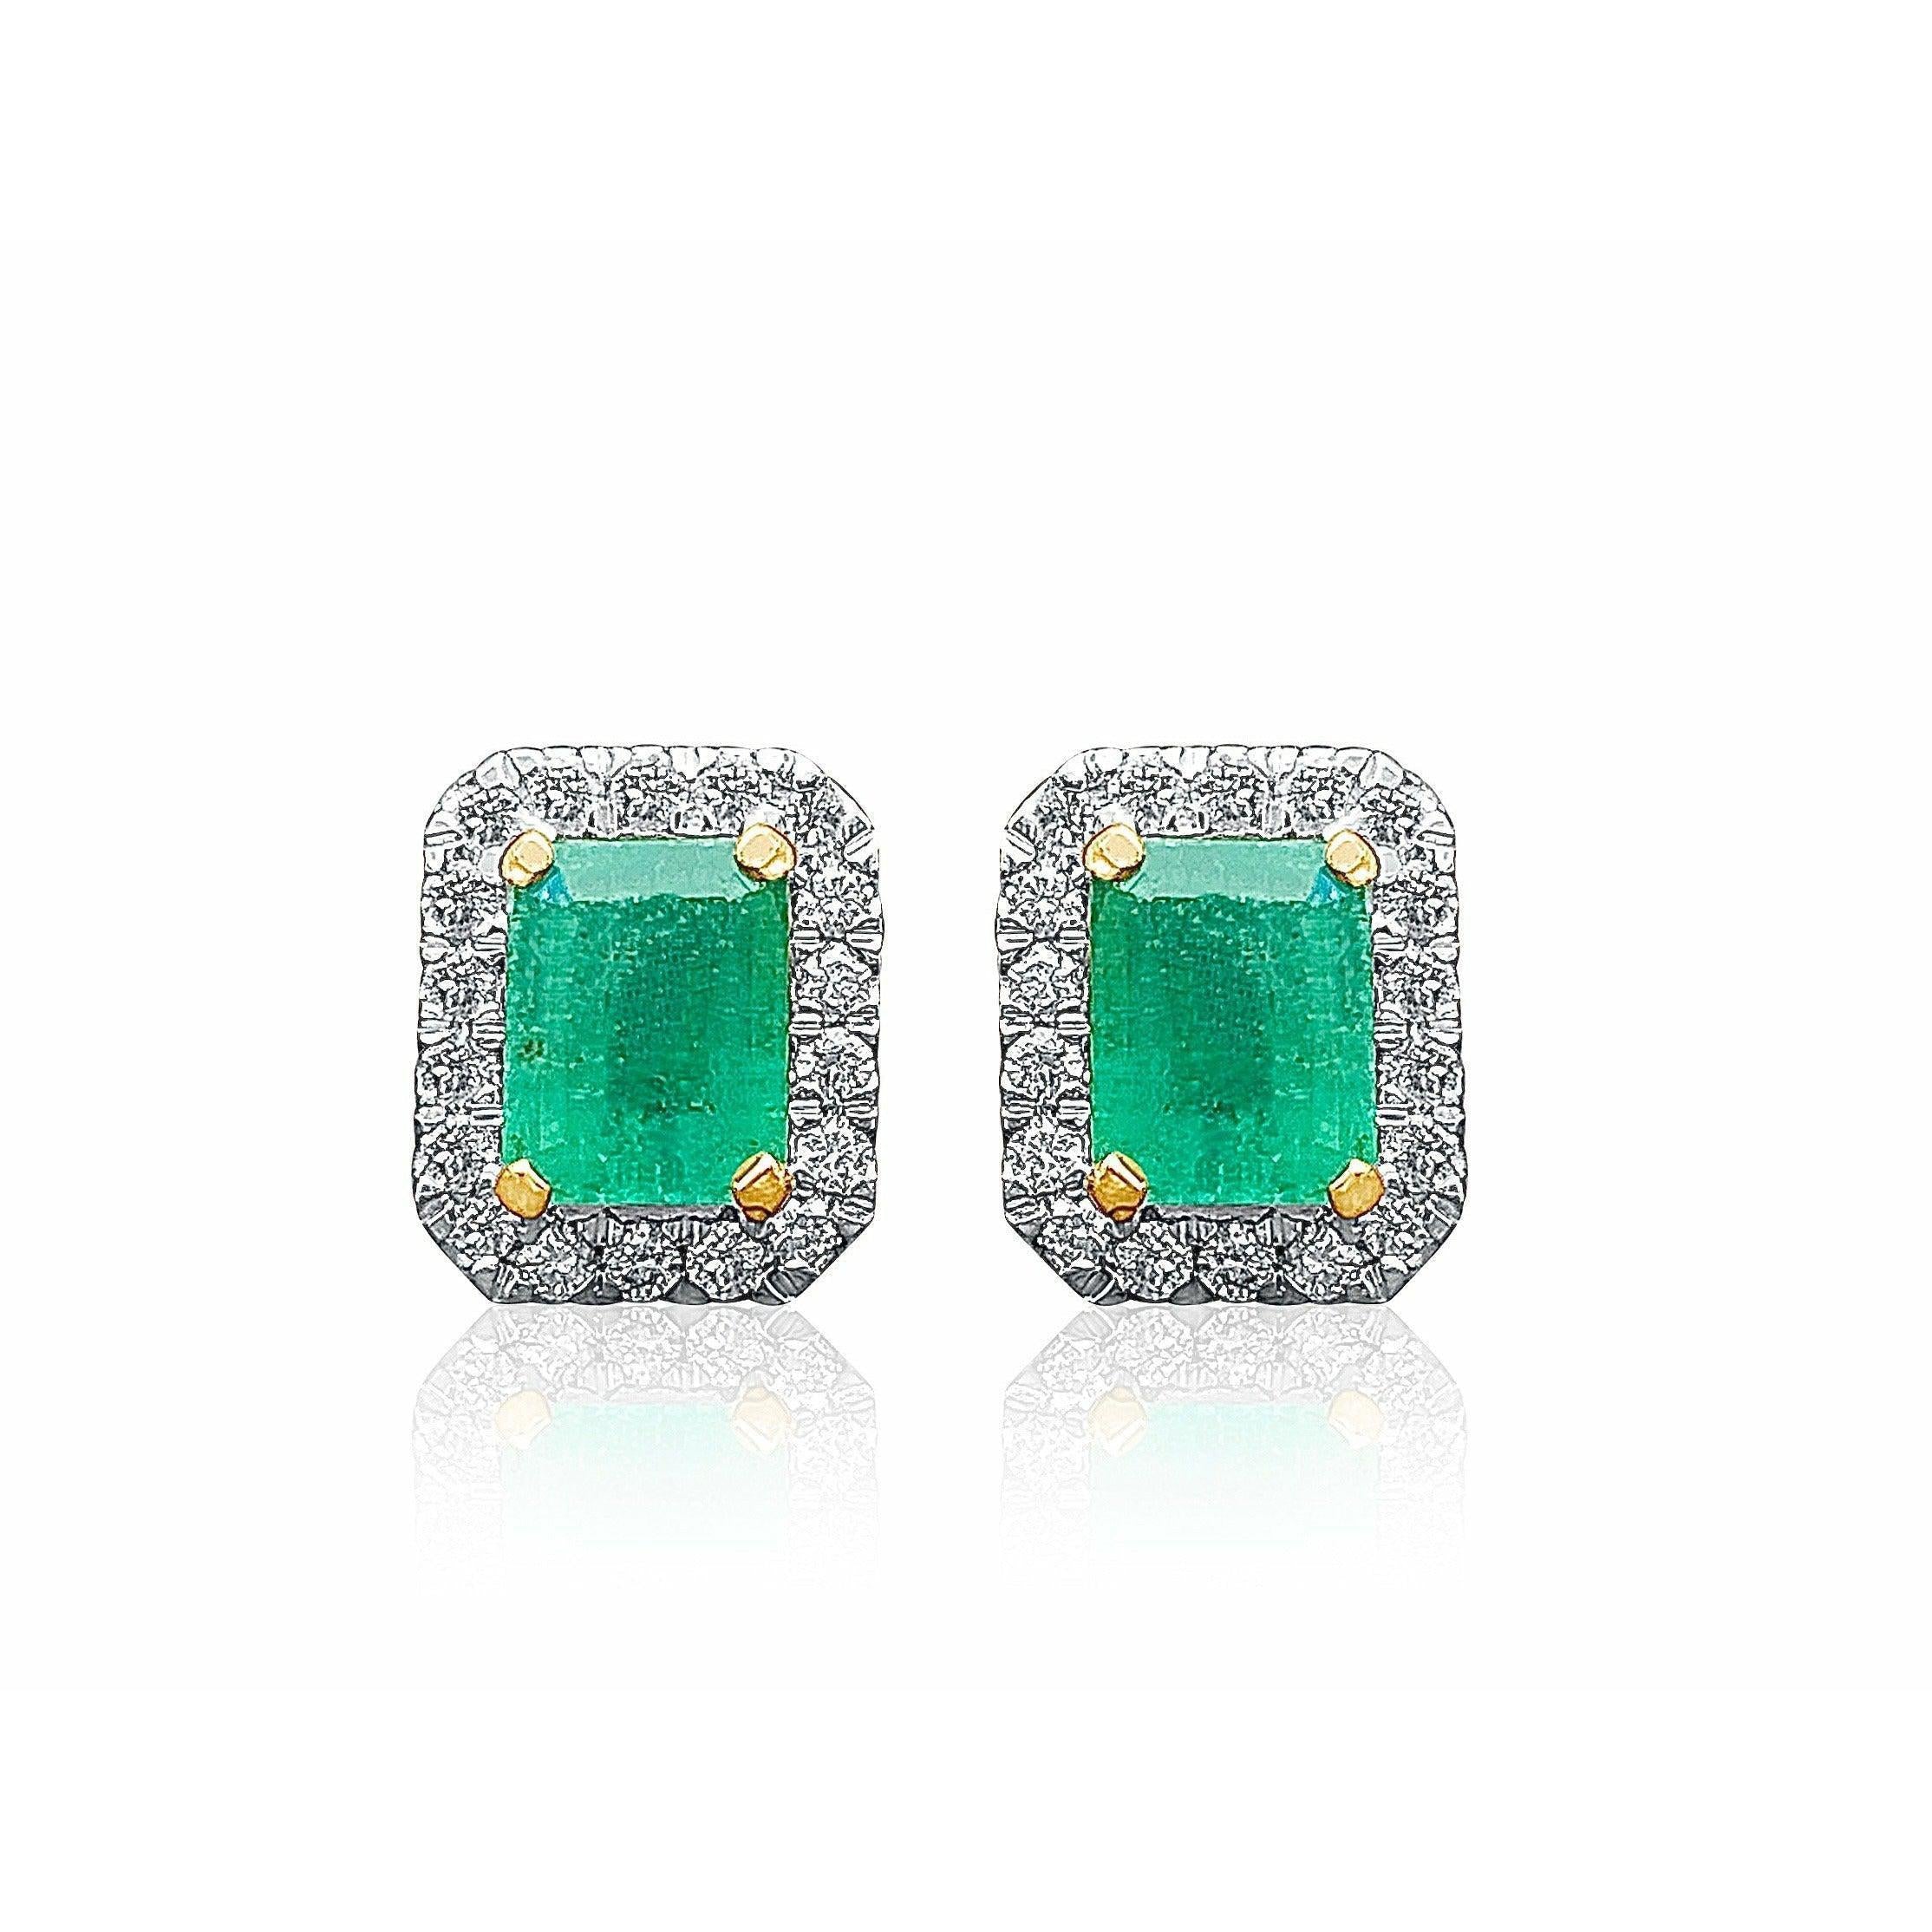 Emerald Cut Colombian Emerald Stud Earrings in 18k white and yellow gold - ASSAY